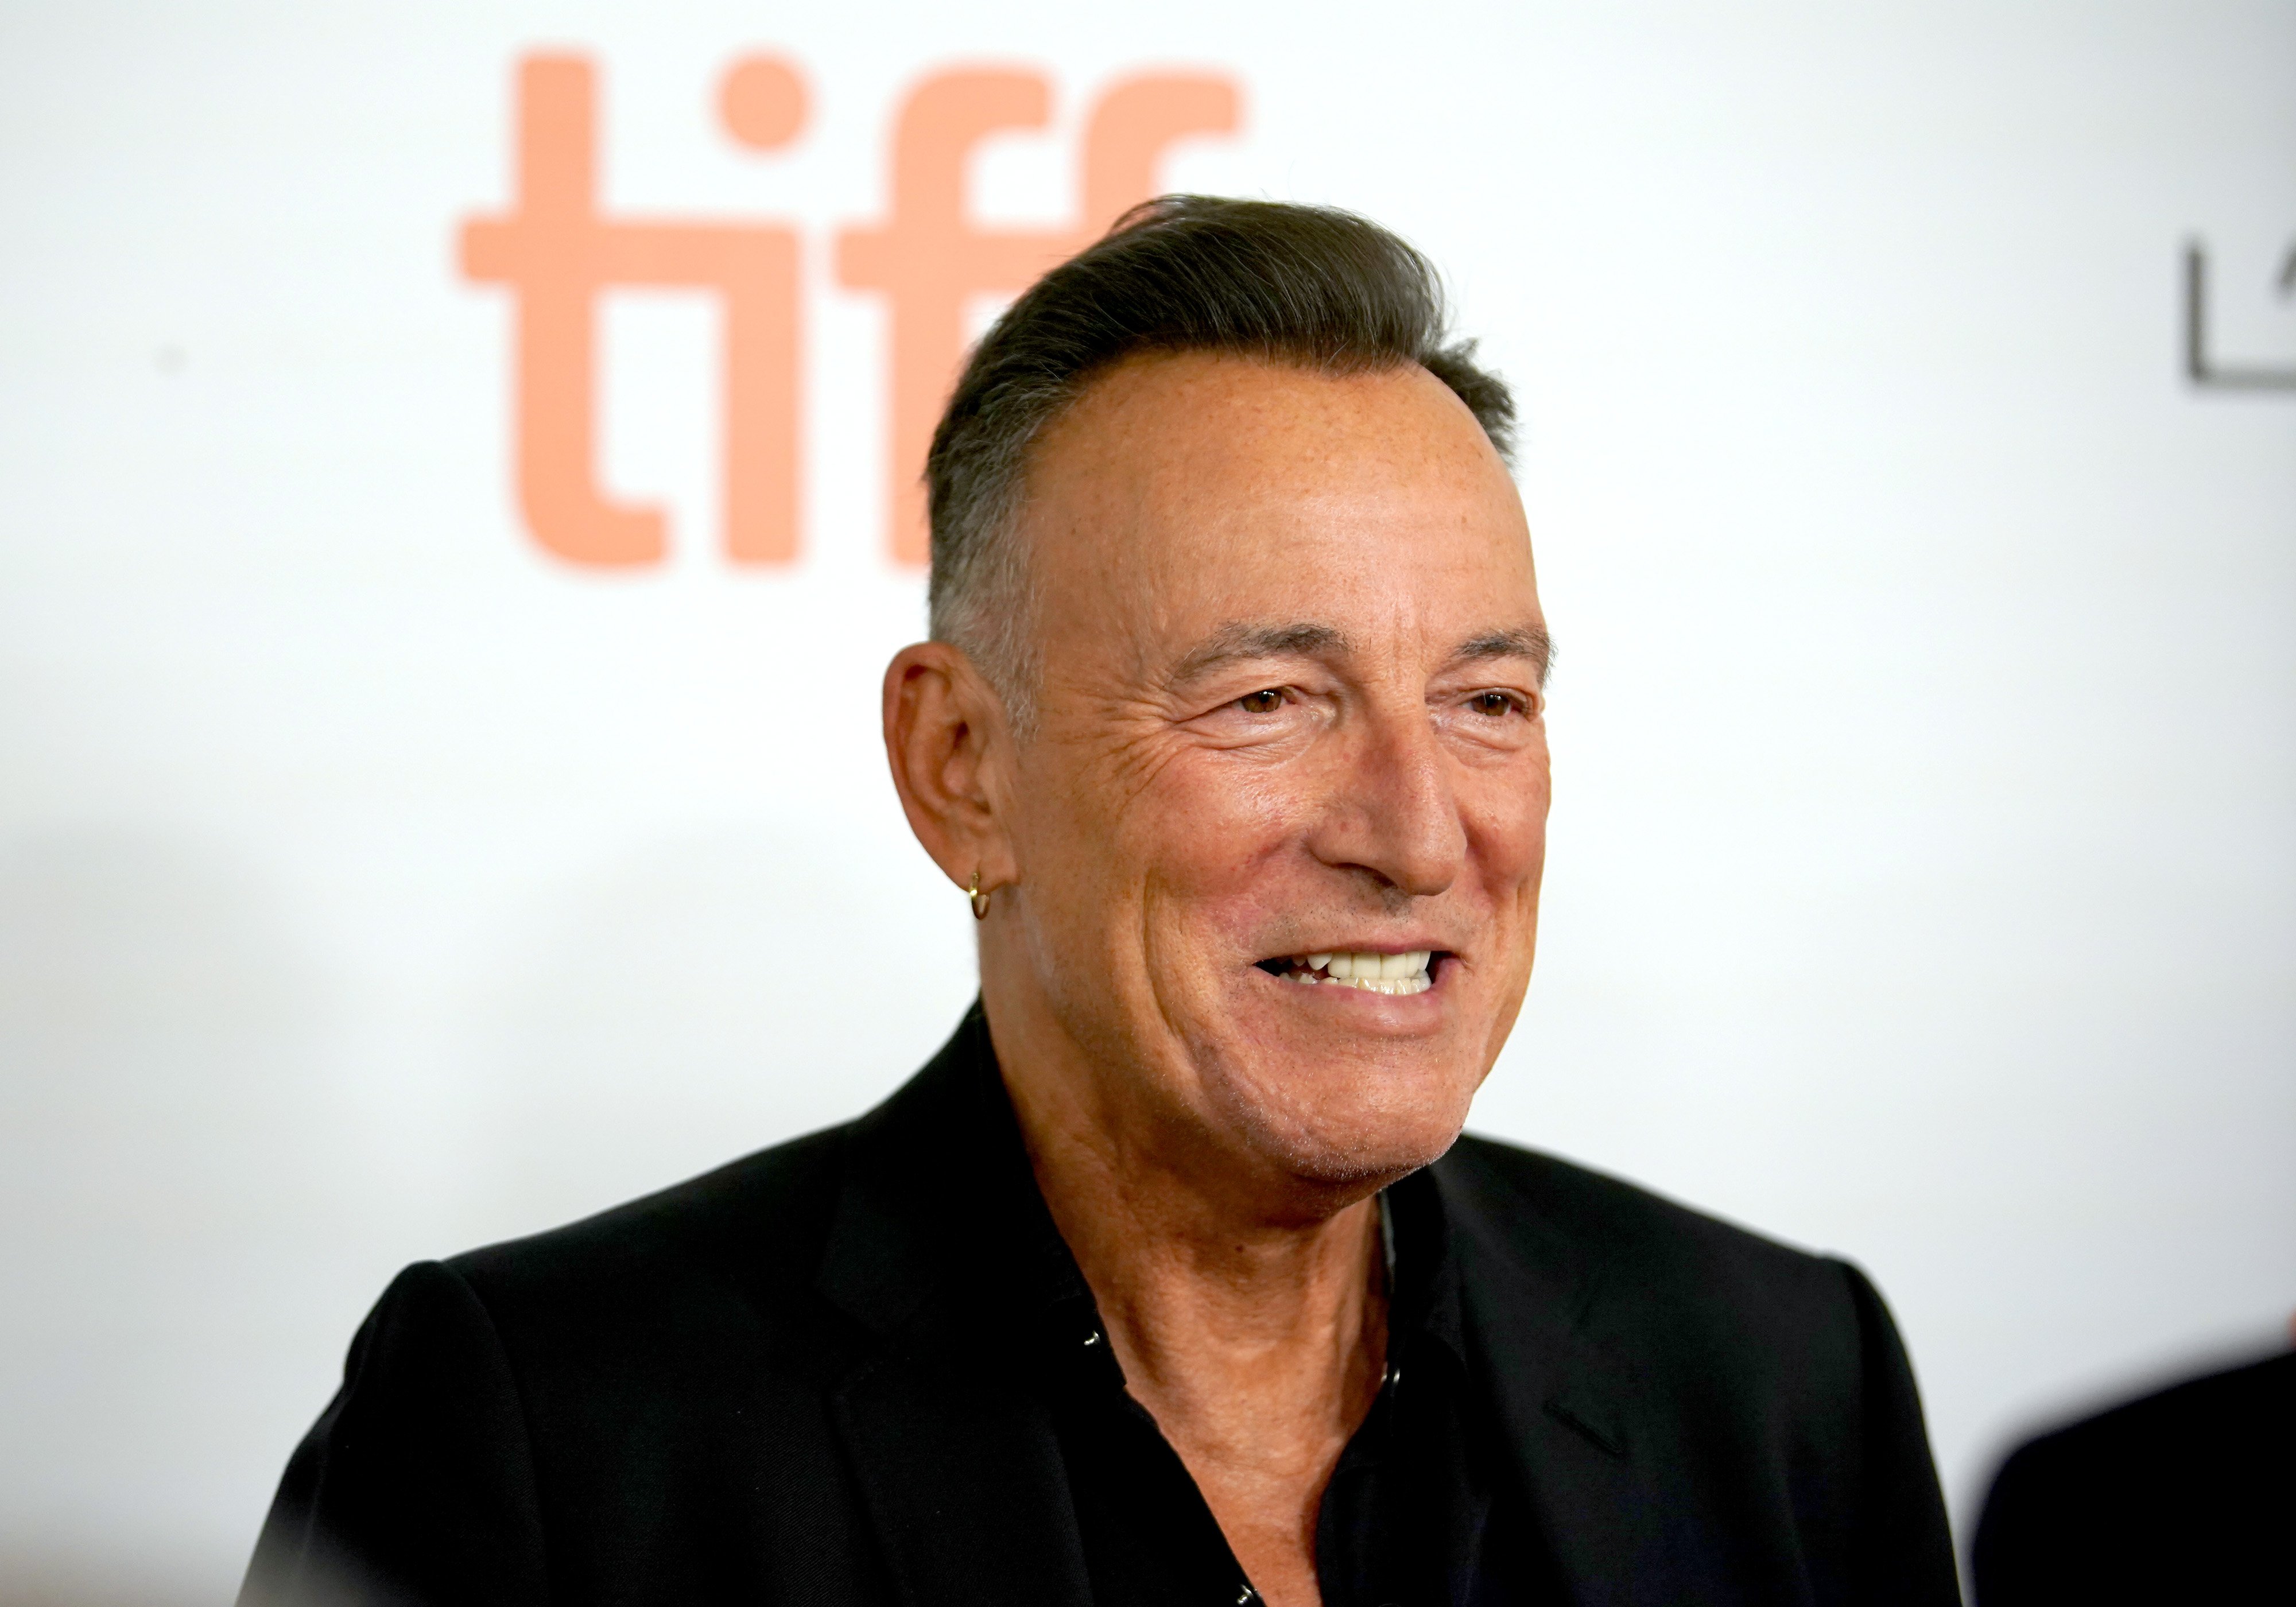 Bruce Springsteen on September 12, 2019 in Toronto, Canada. | Source: Getty Images